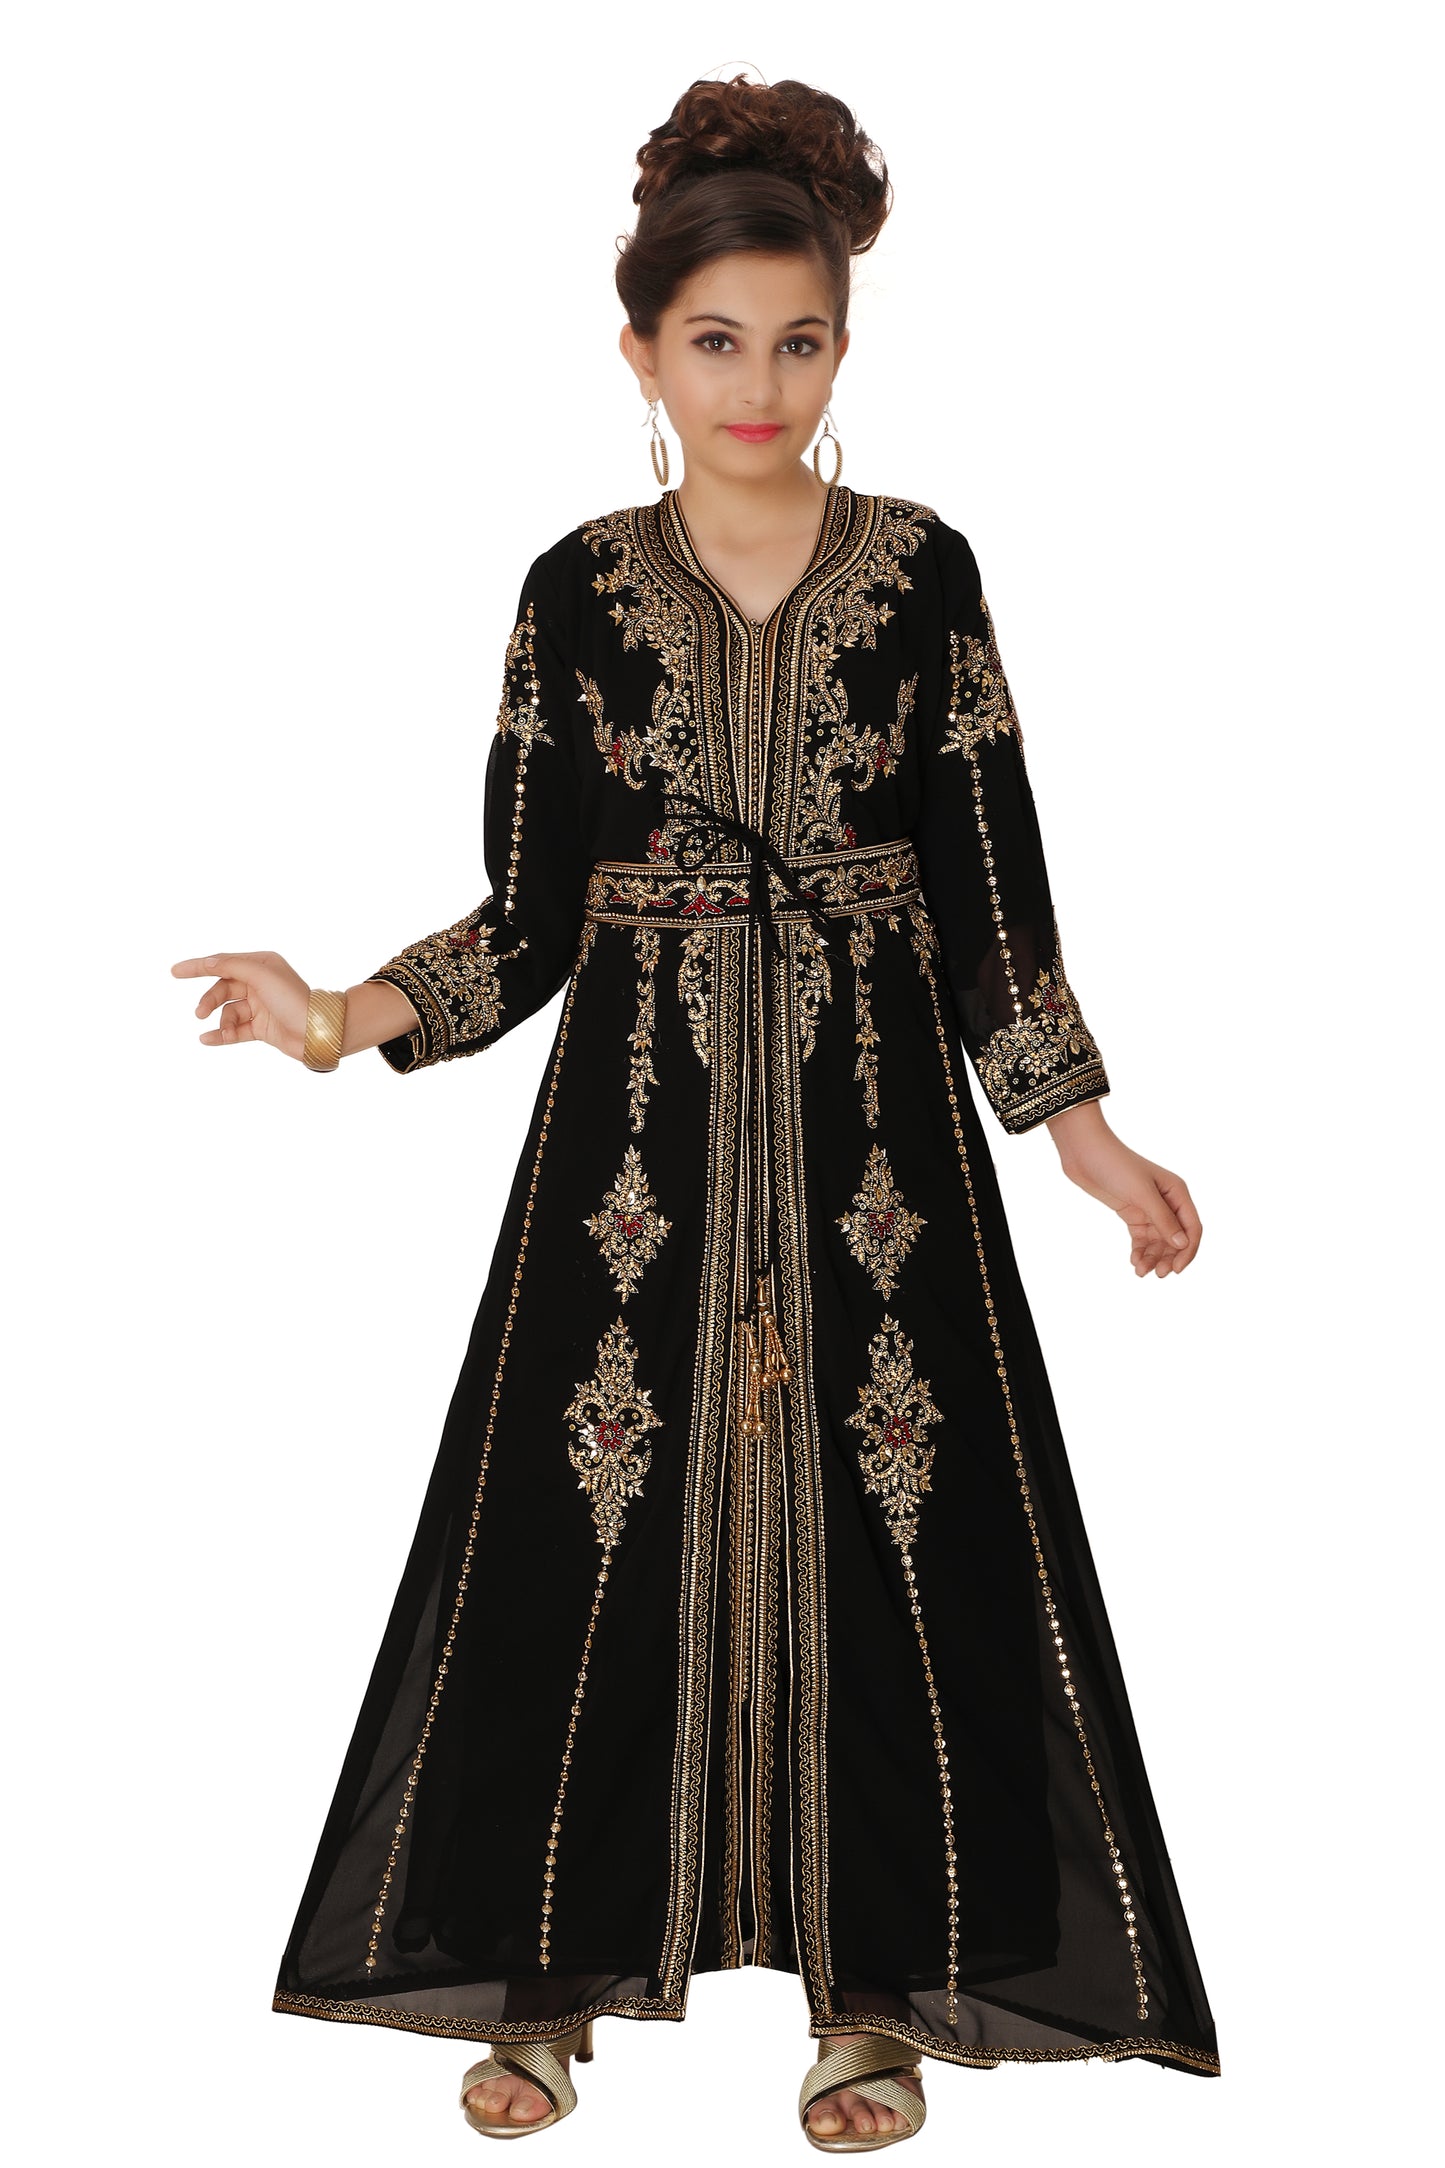 Designer Moroccan Toddler Dress Caftan For Child by Maxim Creation - Maxim Creation